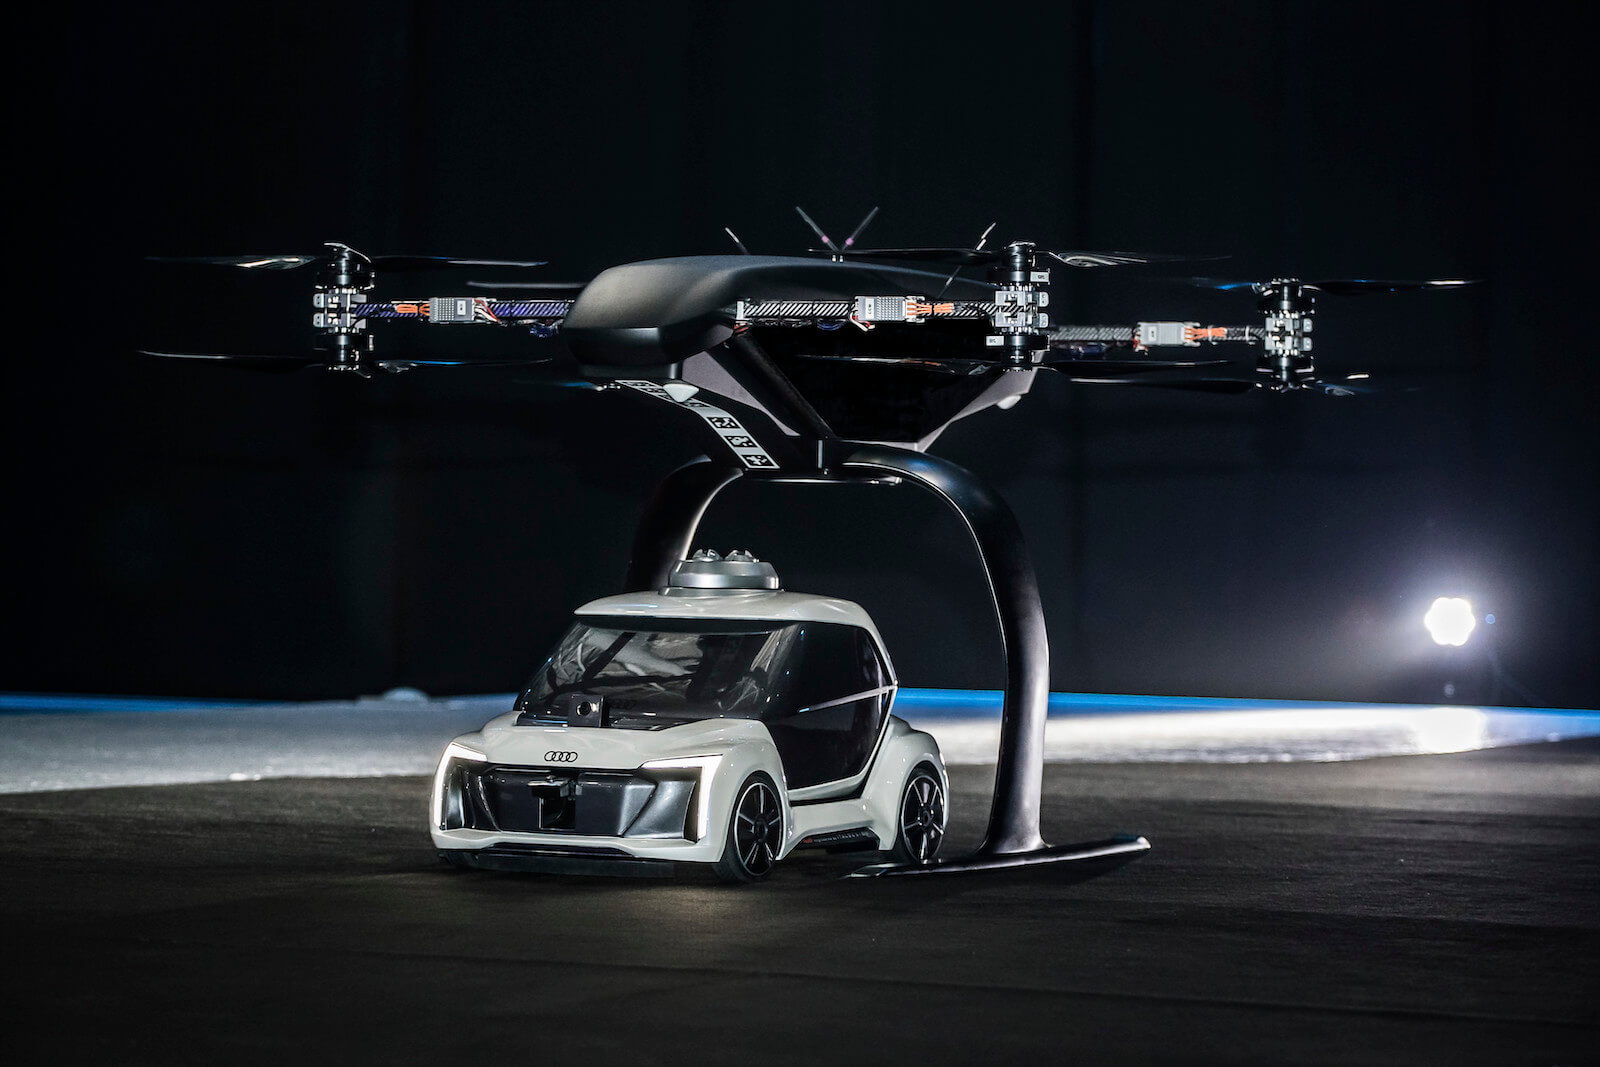 Pop.Up Next Flying taxi